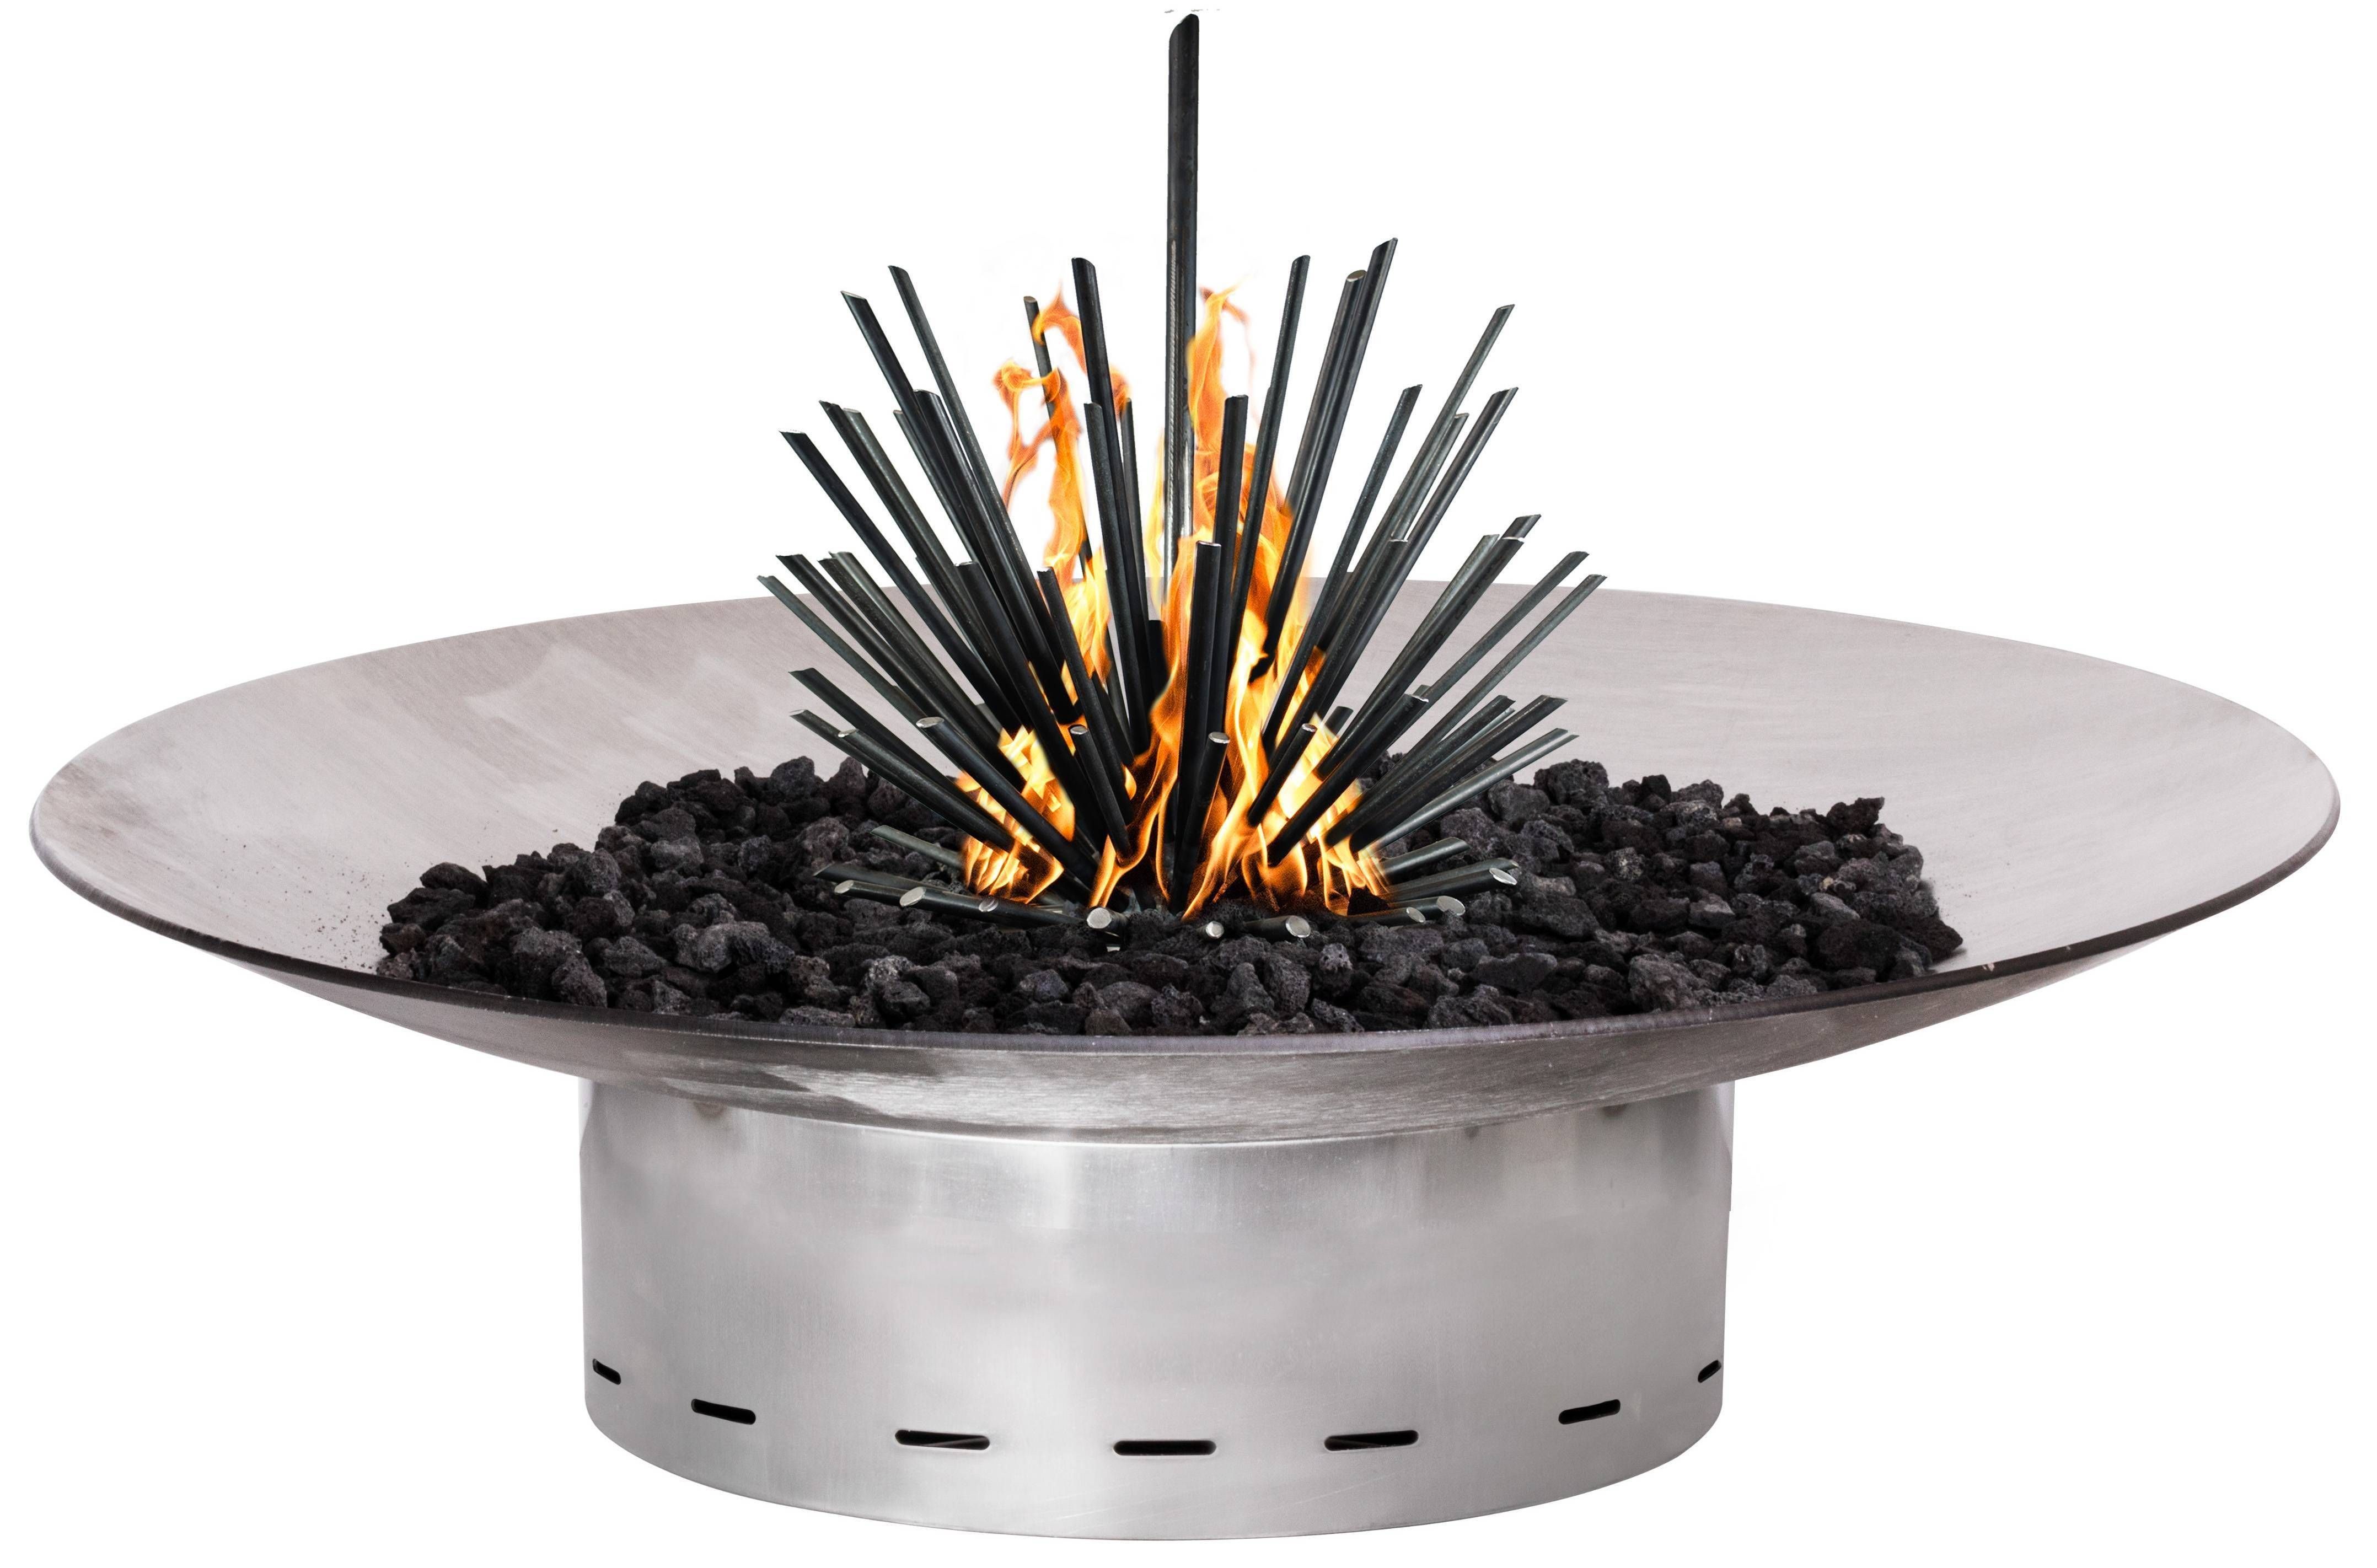 Endless Summer Outdoor Fireplace Awesome Stainless Steel Fire Bowl Starting